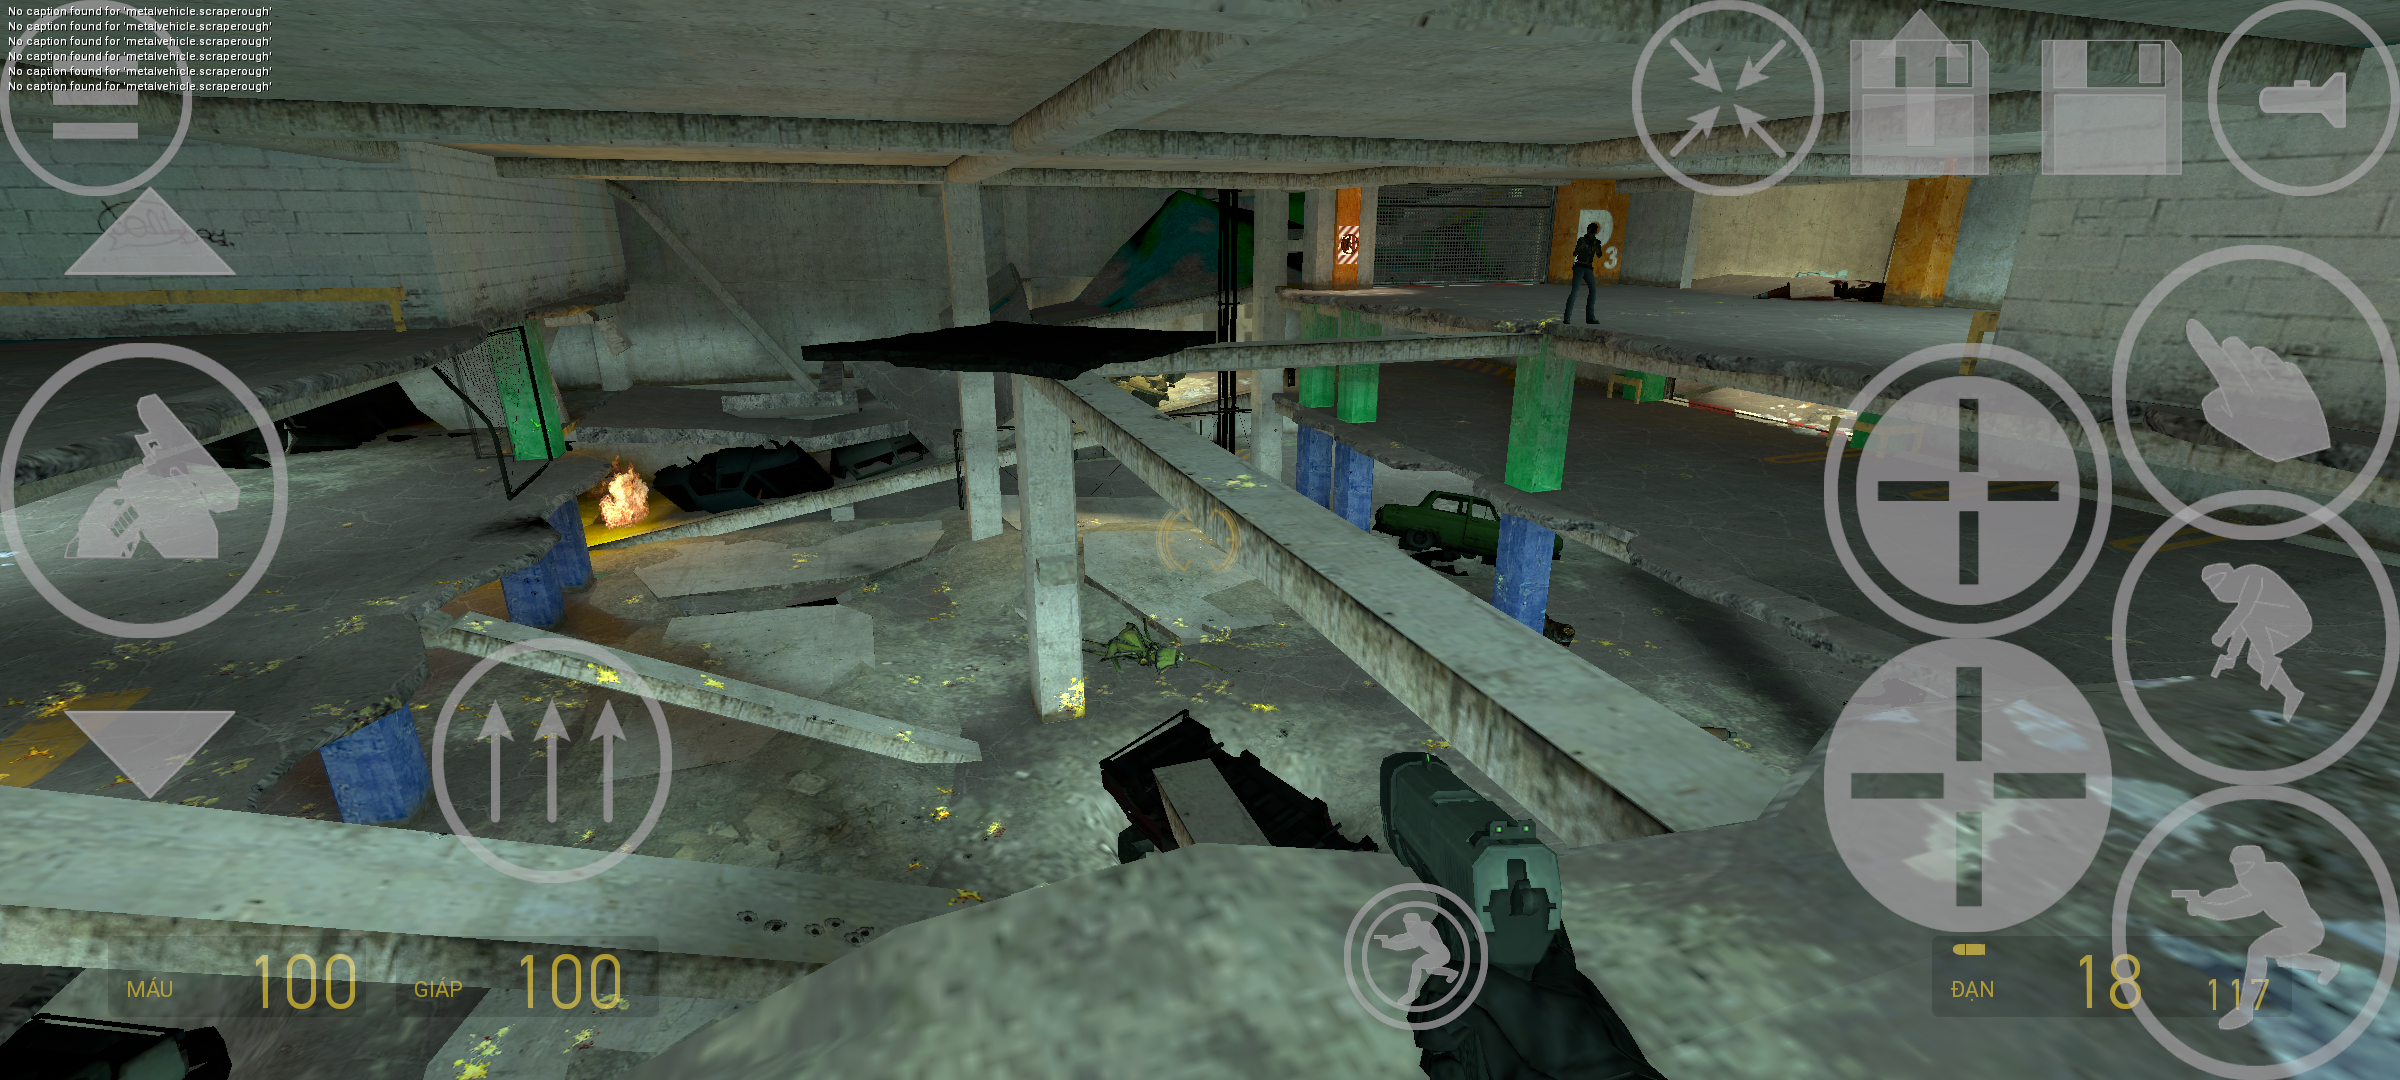 [Game Android] Half-Life 2 Episode One Việt Hóa